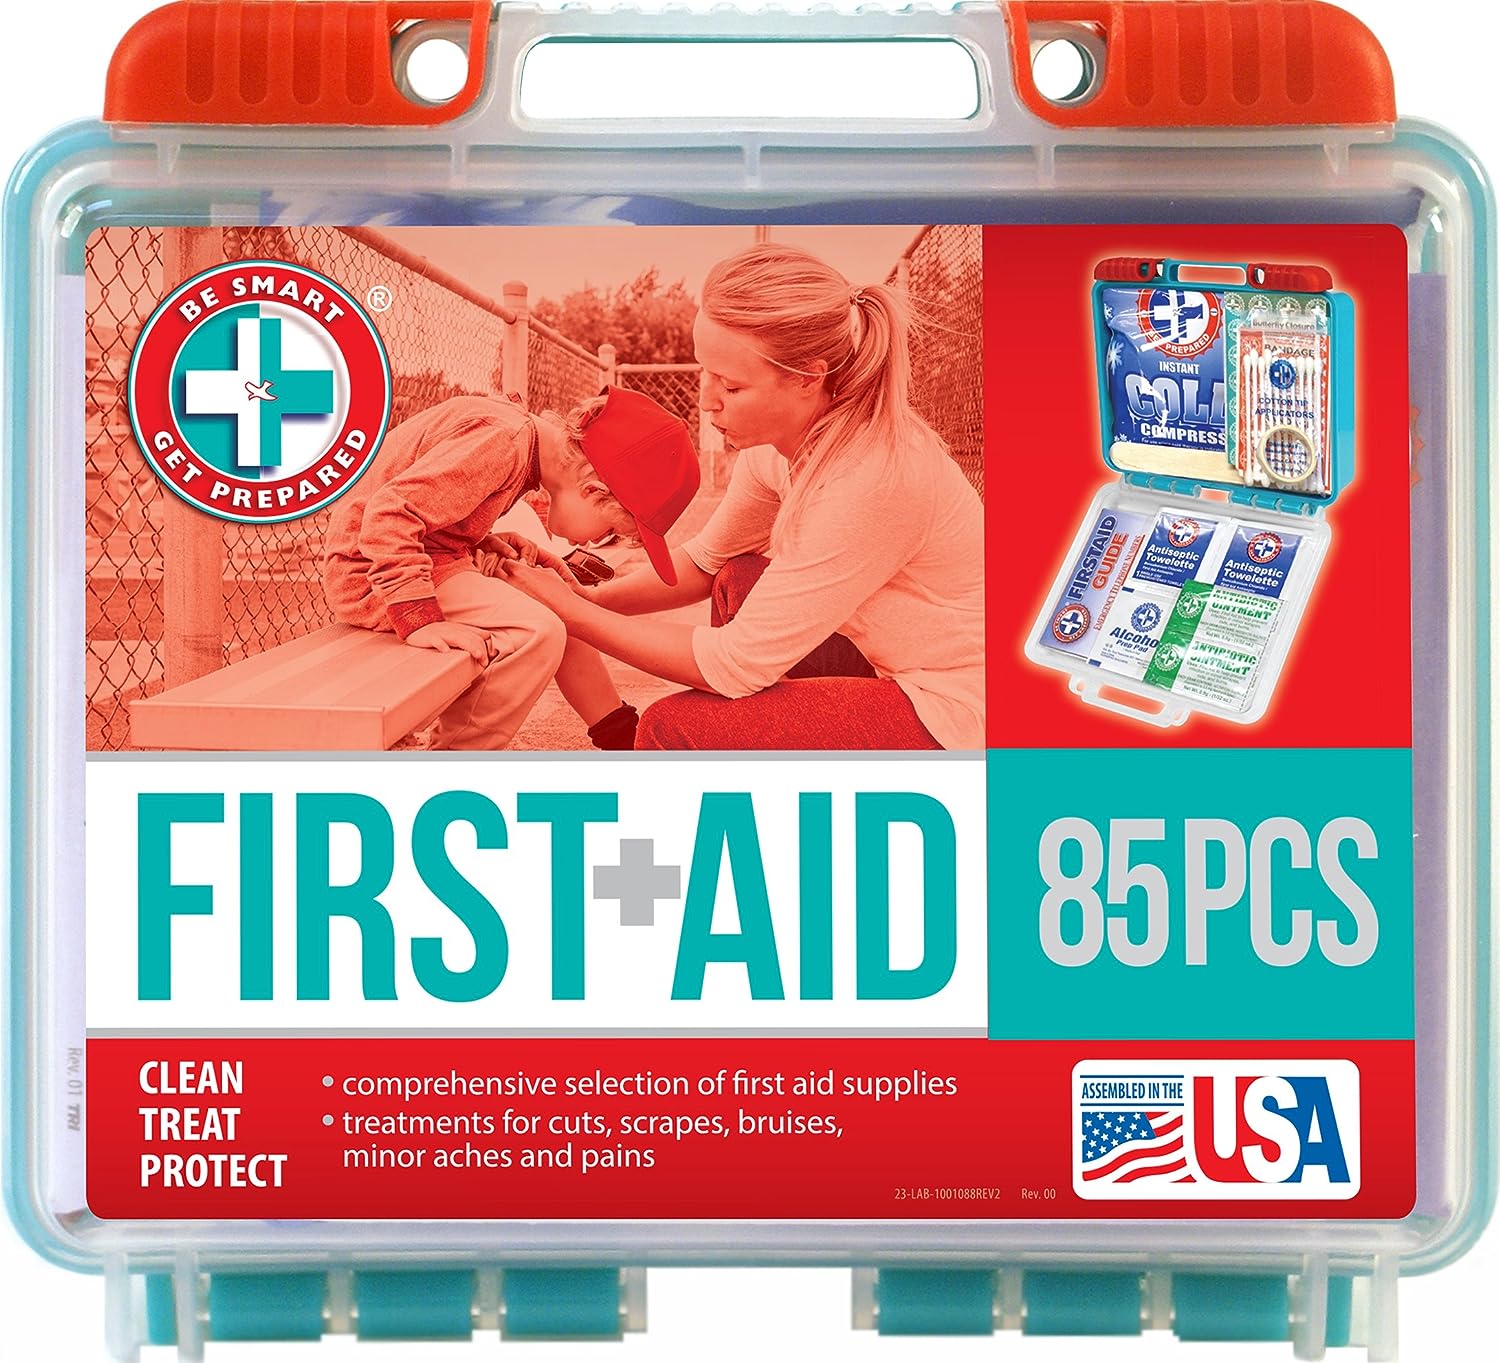 Be Smart Get Prepared 85 Piece First Aid Kit: Clean, [...]